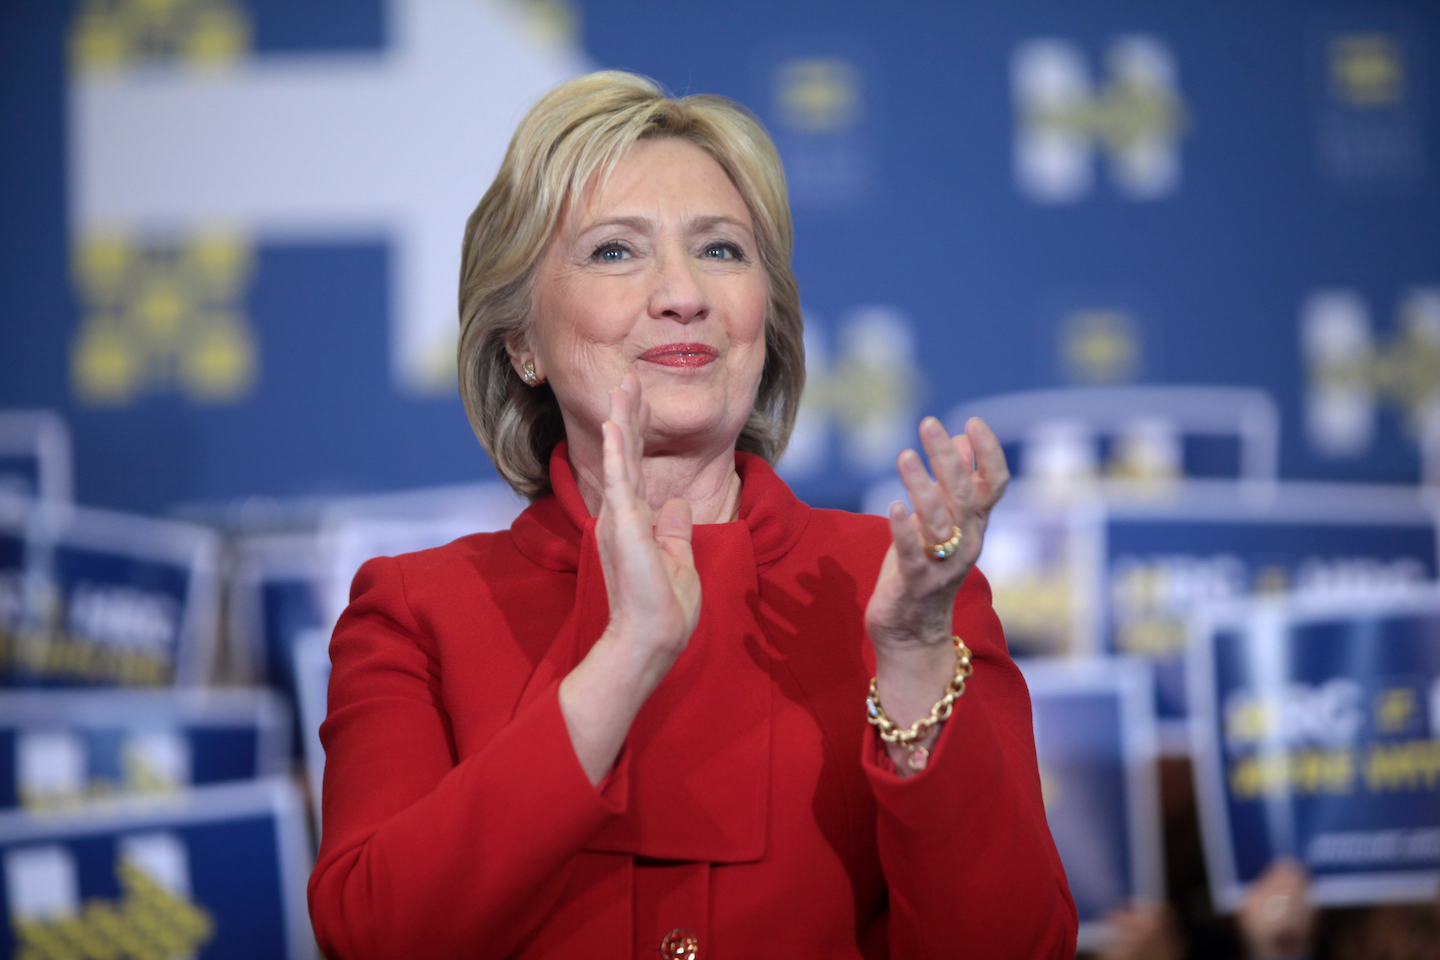 New study reveals how Hillary Clinton received nearly a million votes from non-citizens